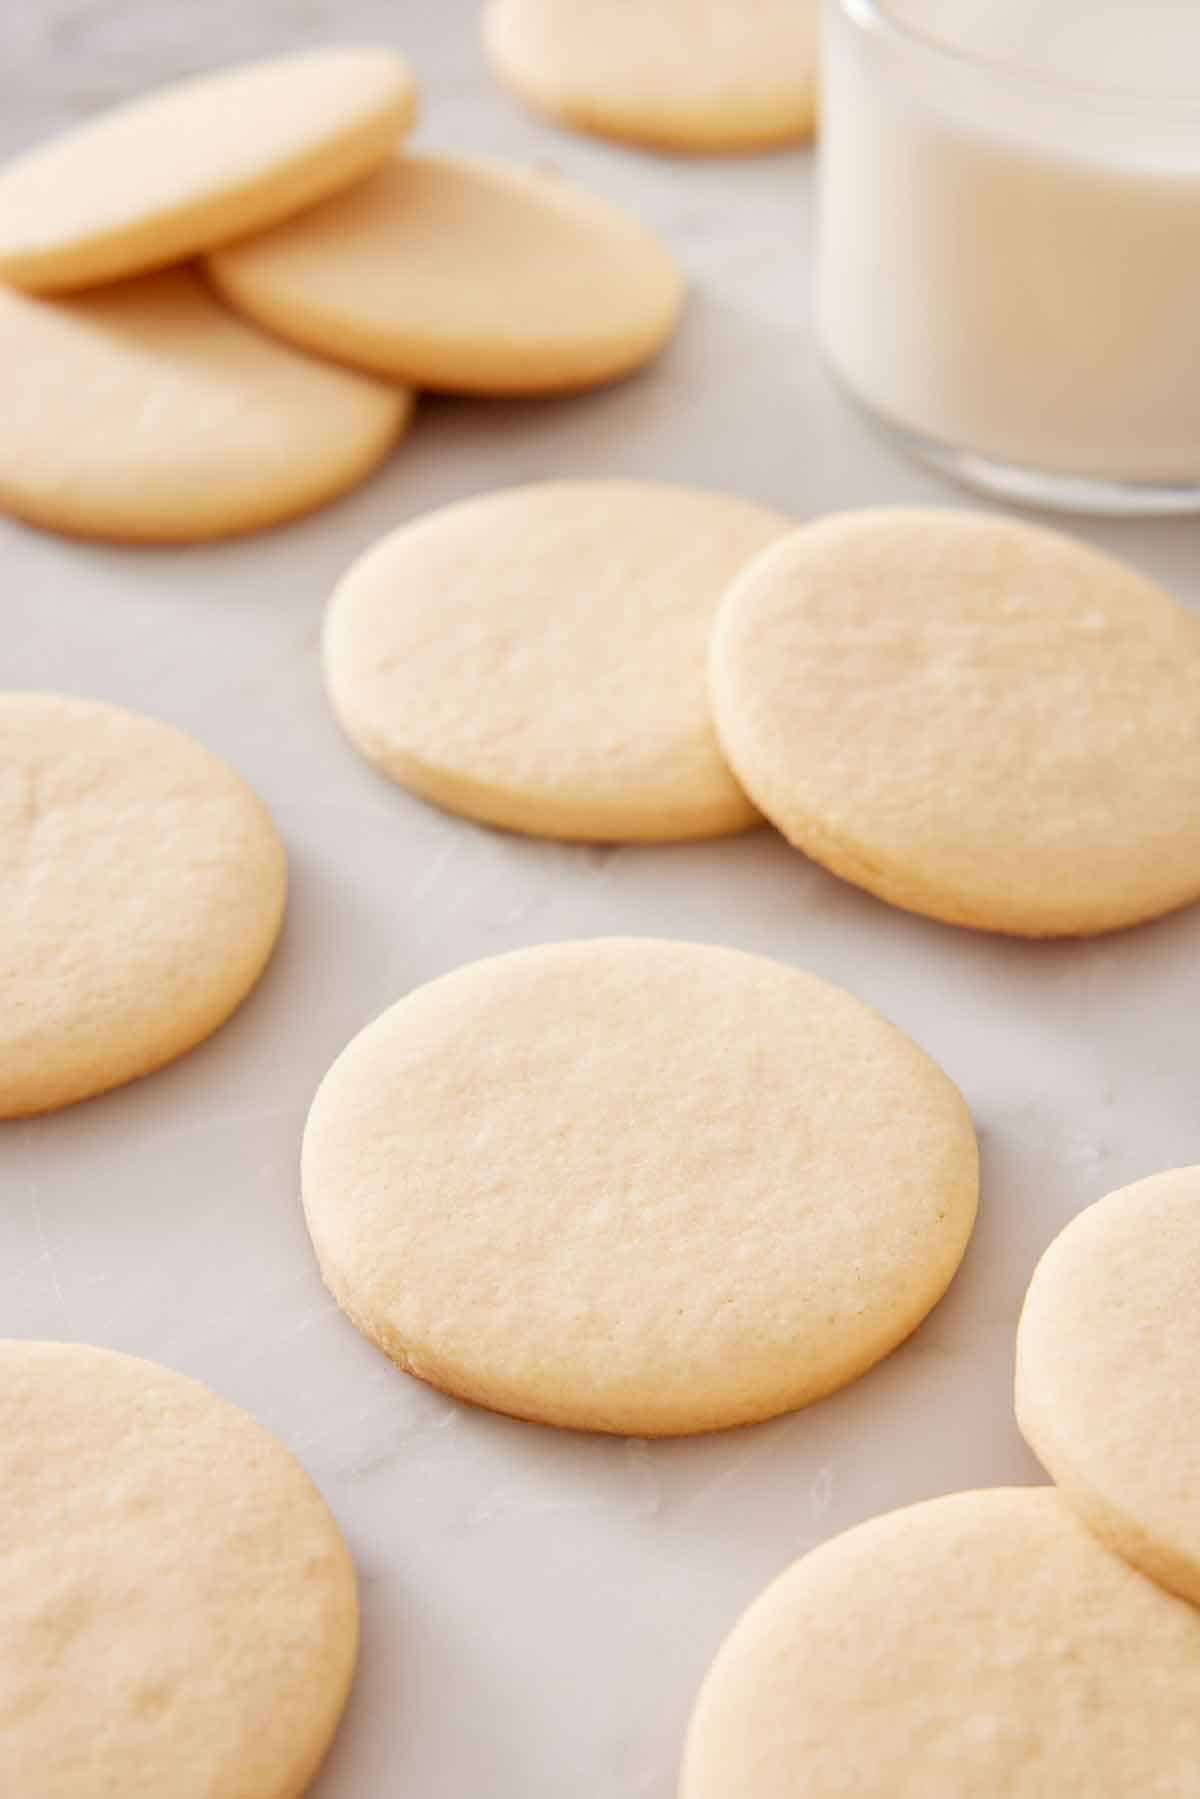 Multiple sugar cookies on a marble surface, some are slightly stacked on others. A glass of milk in the background.